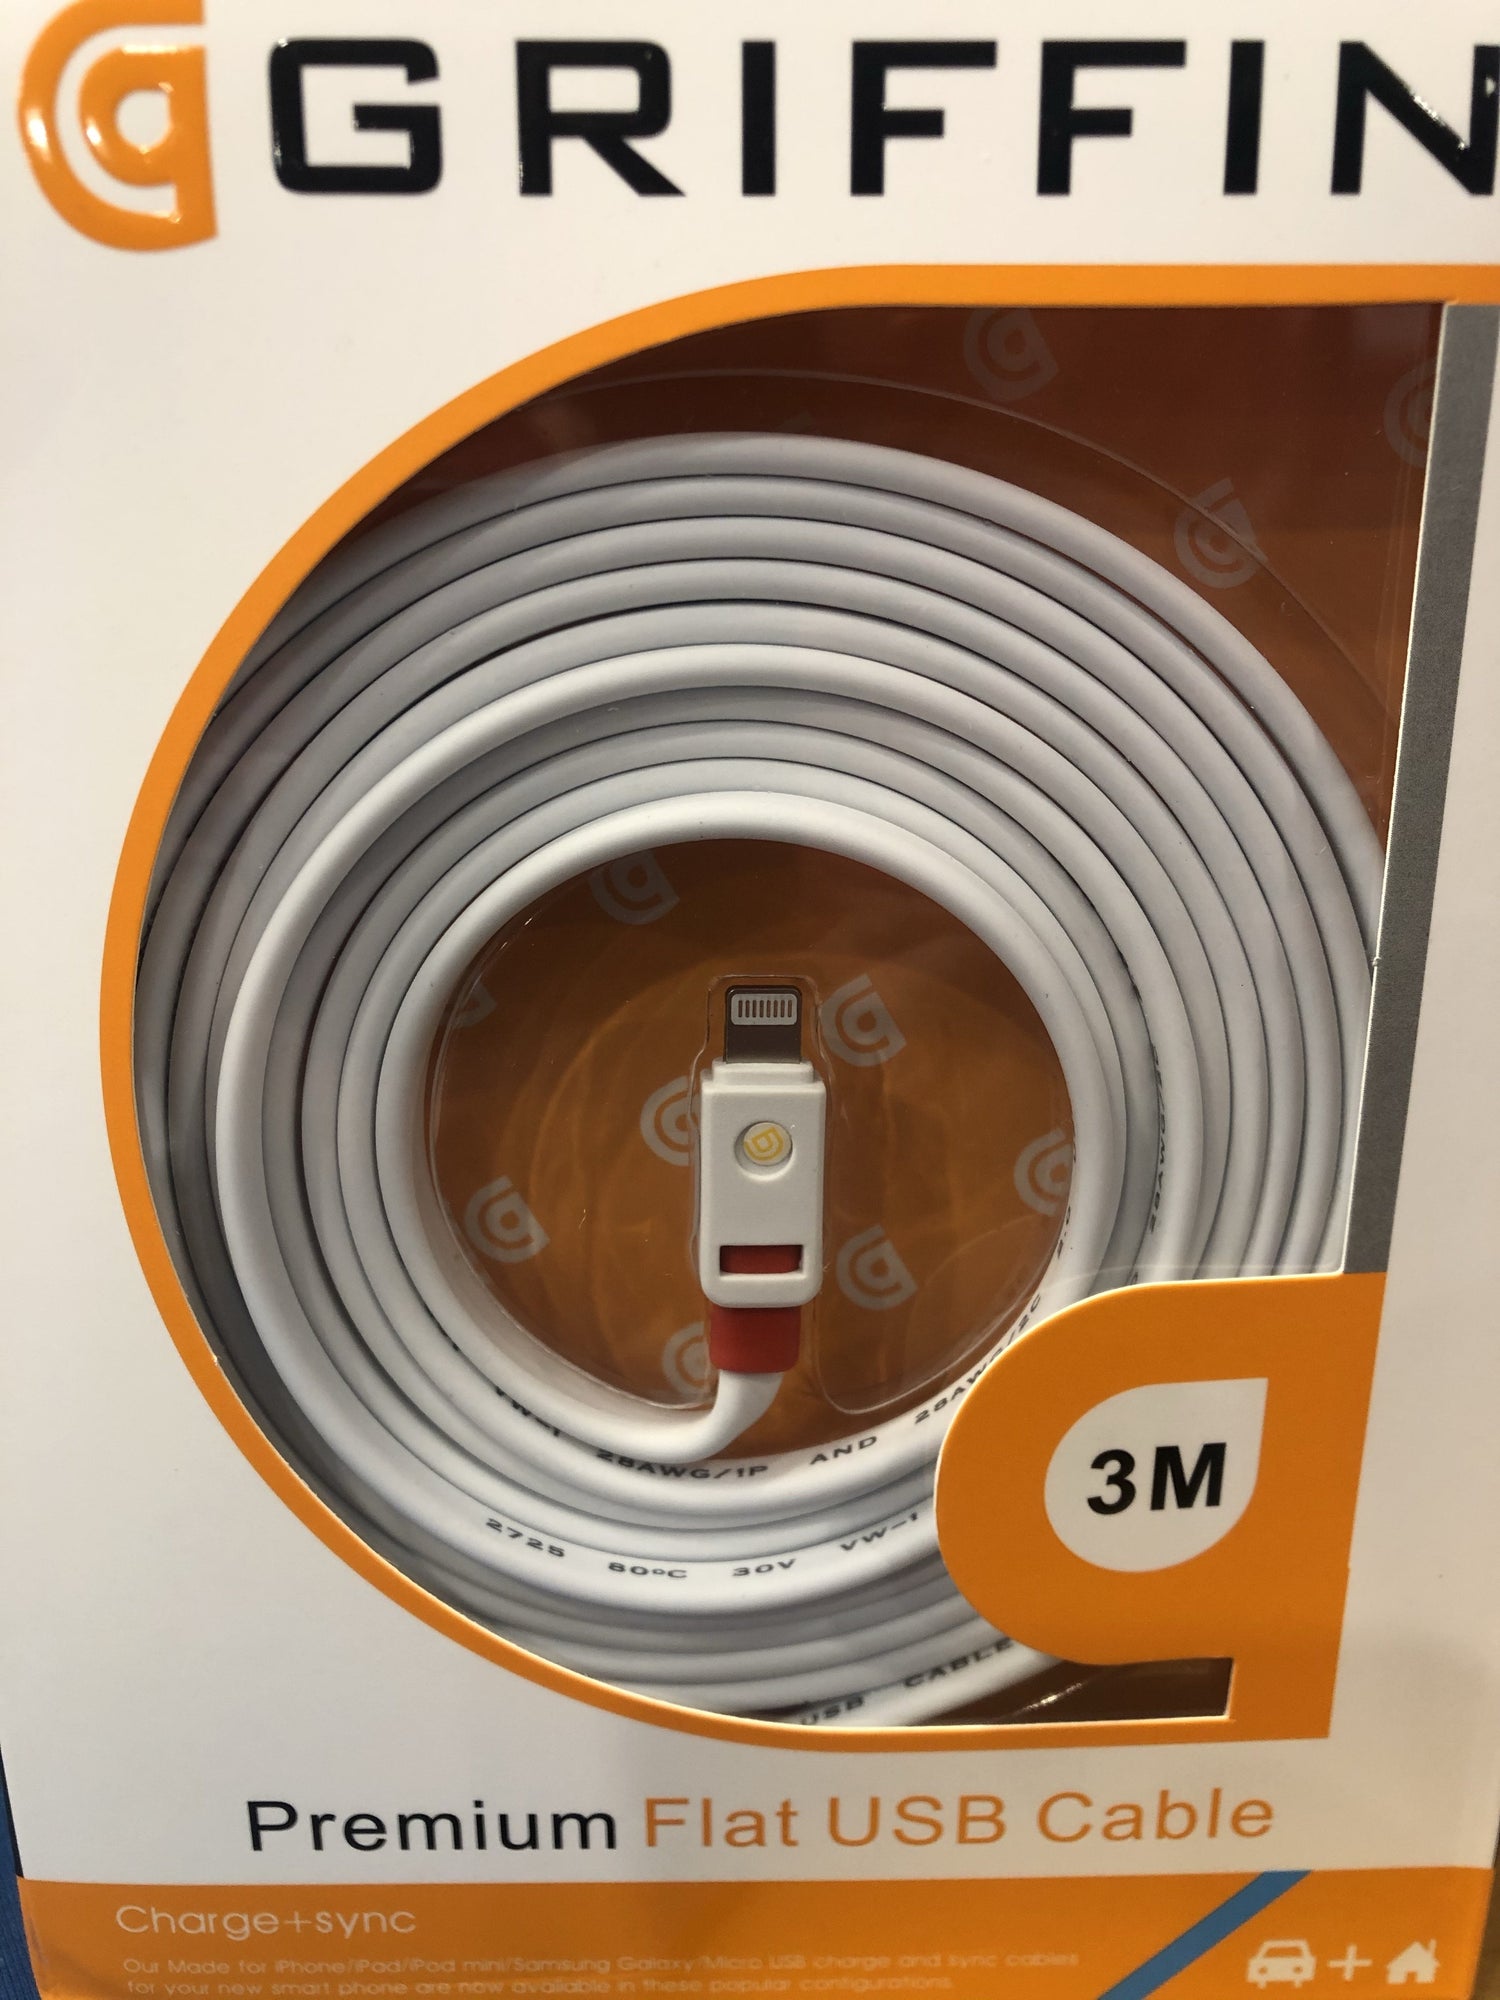 Phone Cable 3 Metres to suit iPhone iPad - JohnnyBoyAus